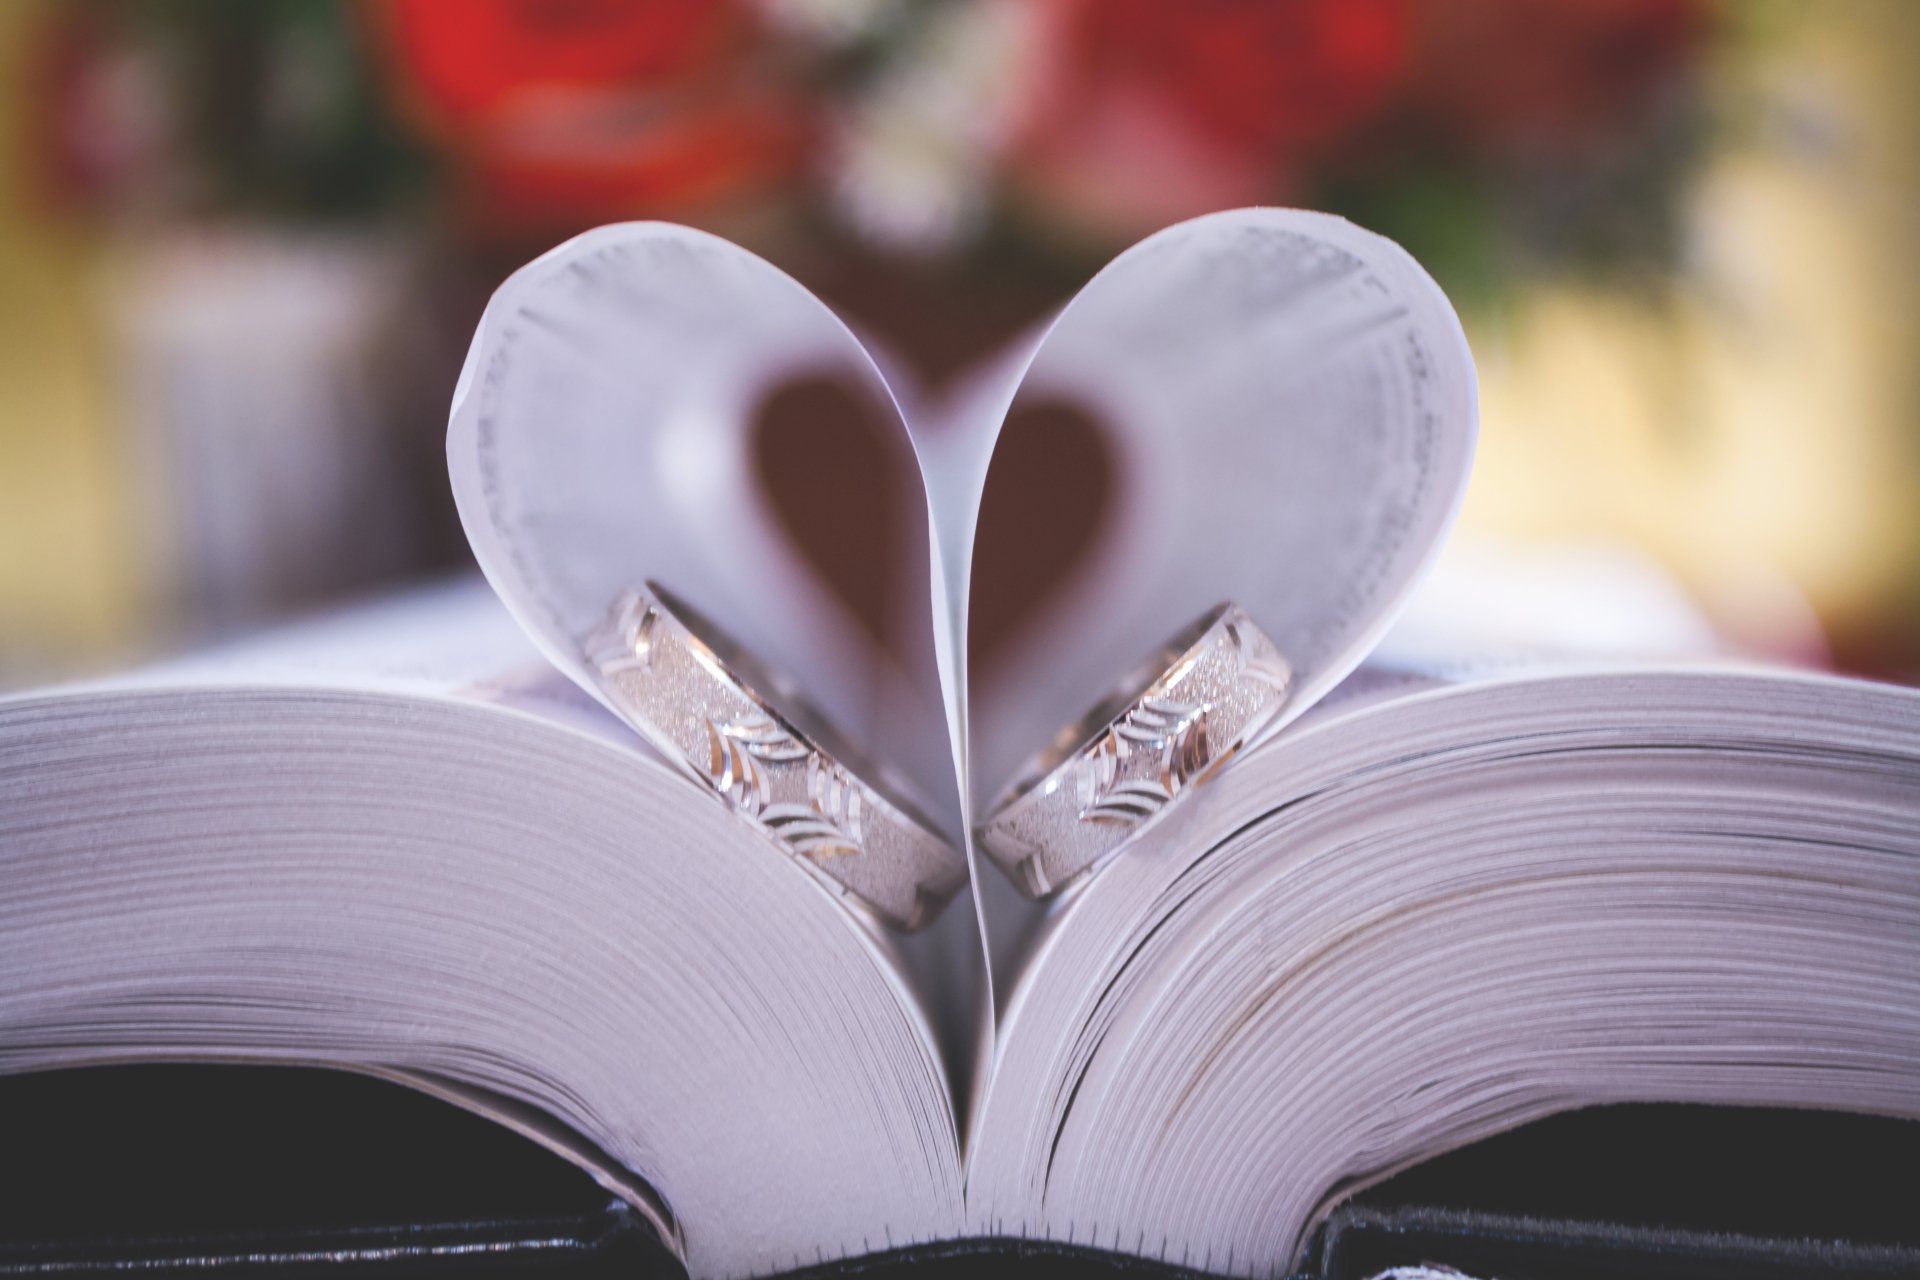 An open book with two pages folded to look like a heart, with wedding rings inside the pages